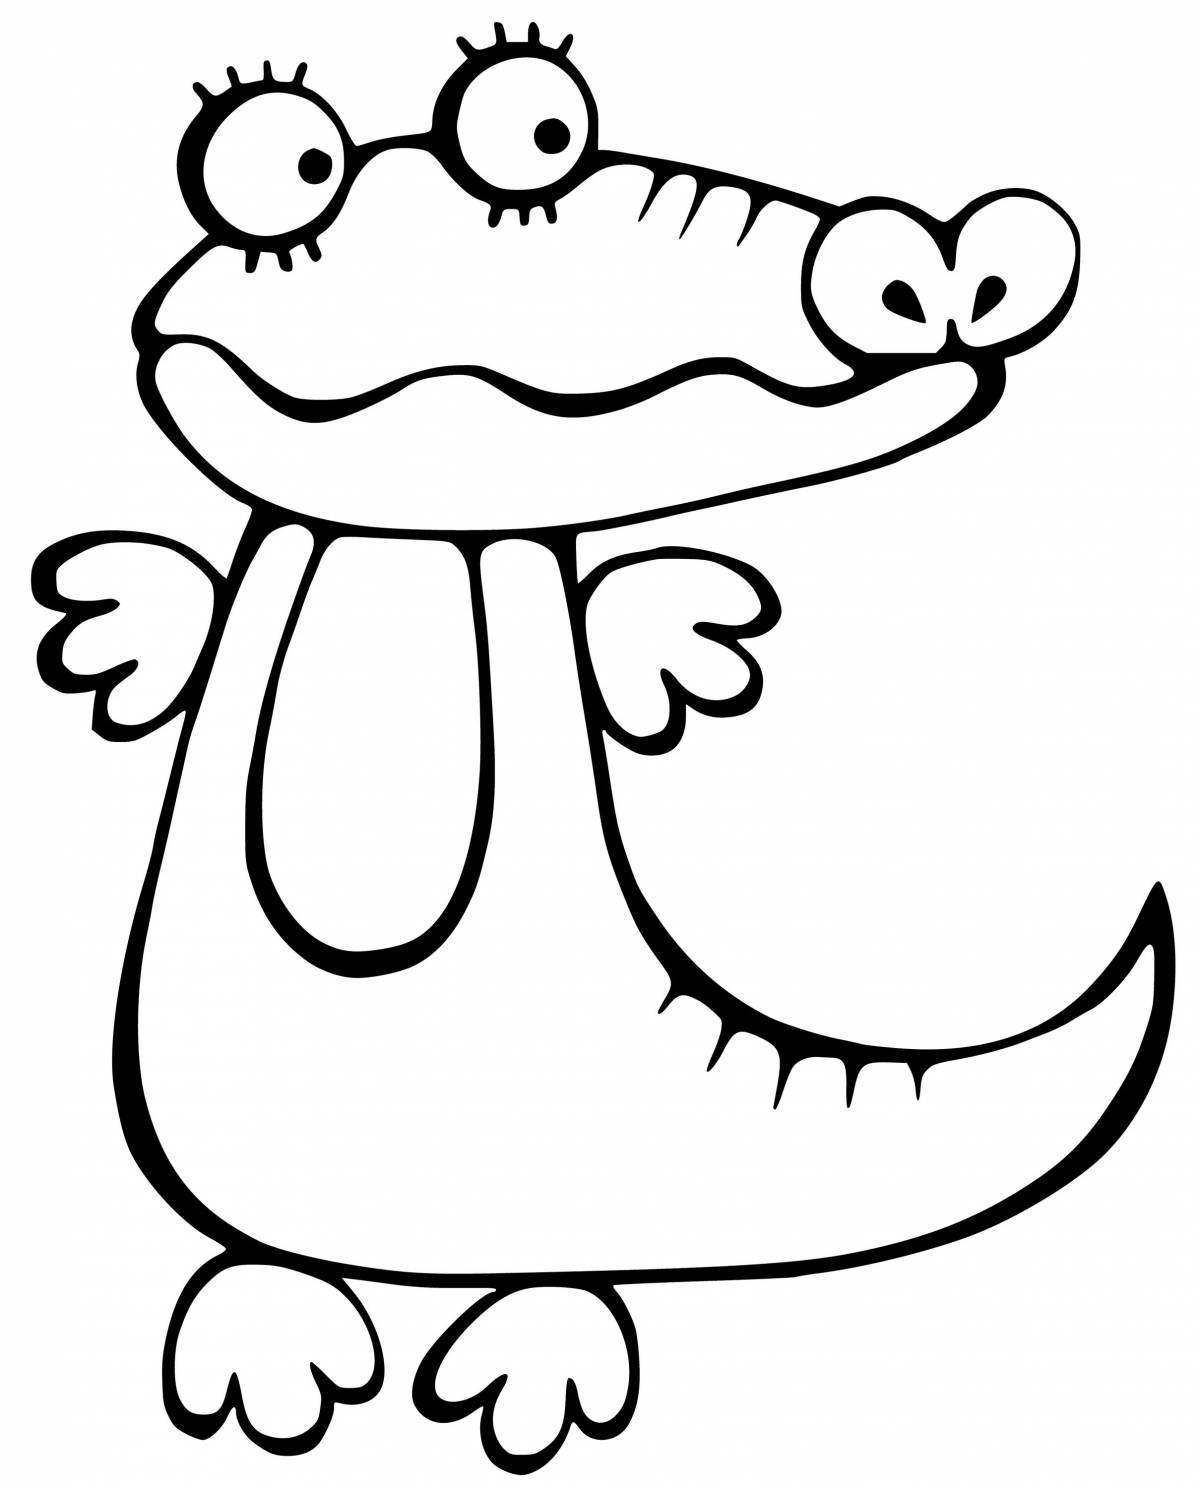 Coloring book cheerful crocodile for children 3-4 years old